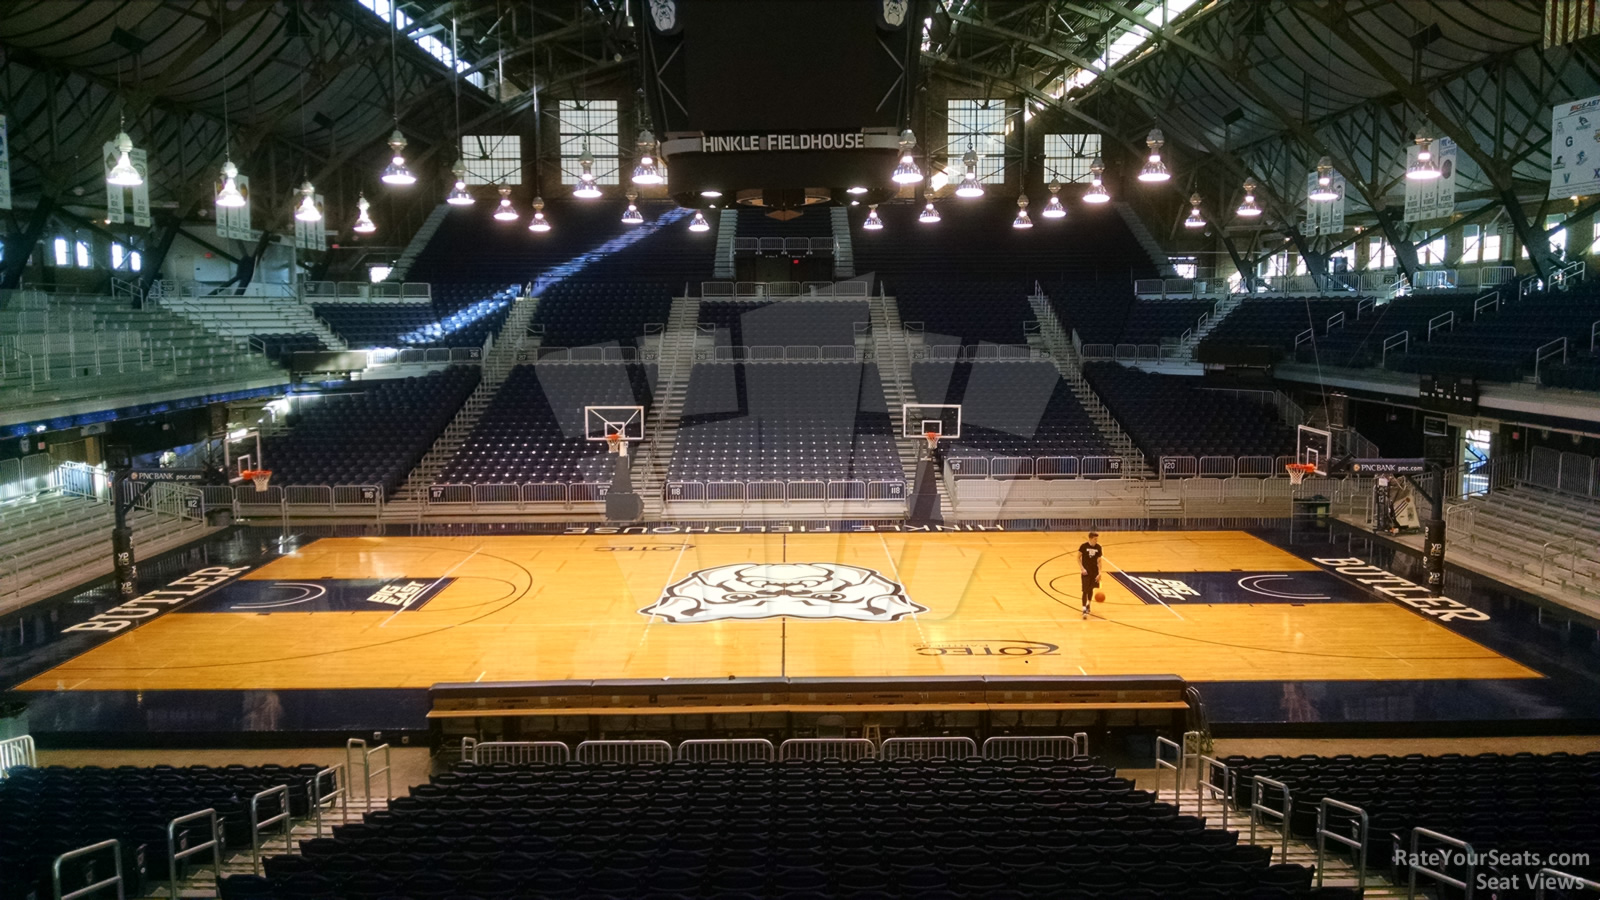 Hinkle Fieldhouse Section 206 - RateYourSeats.com